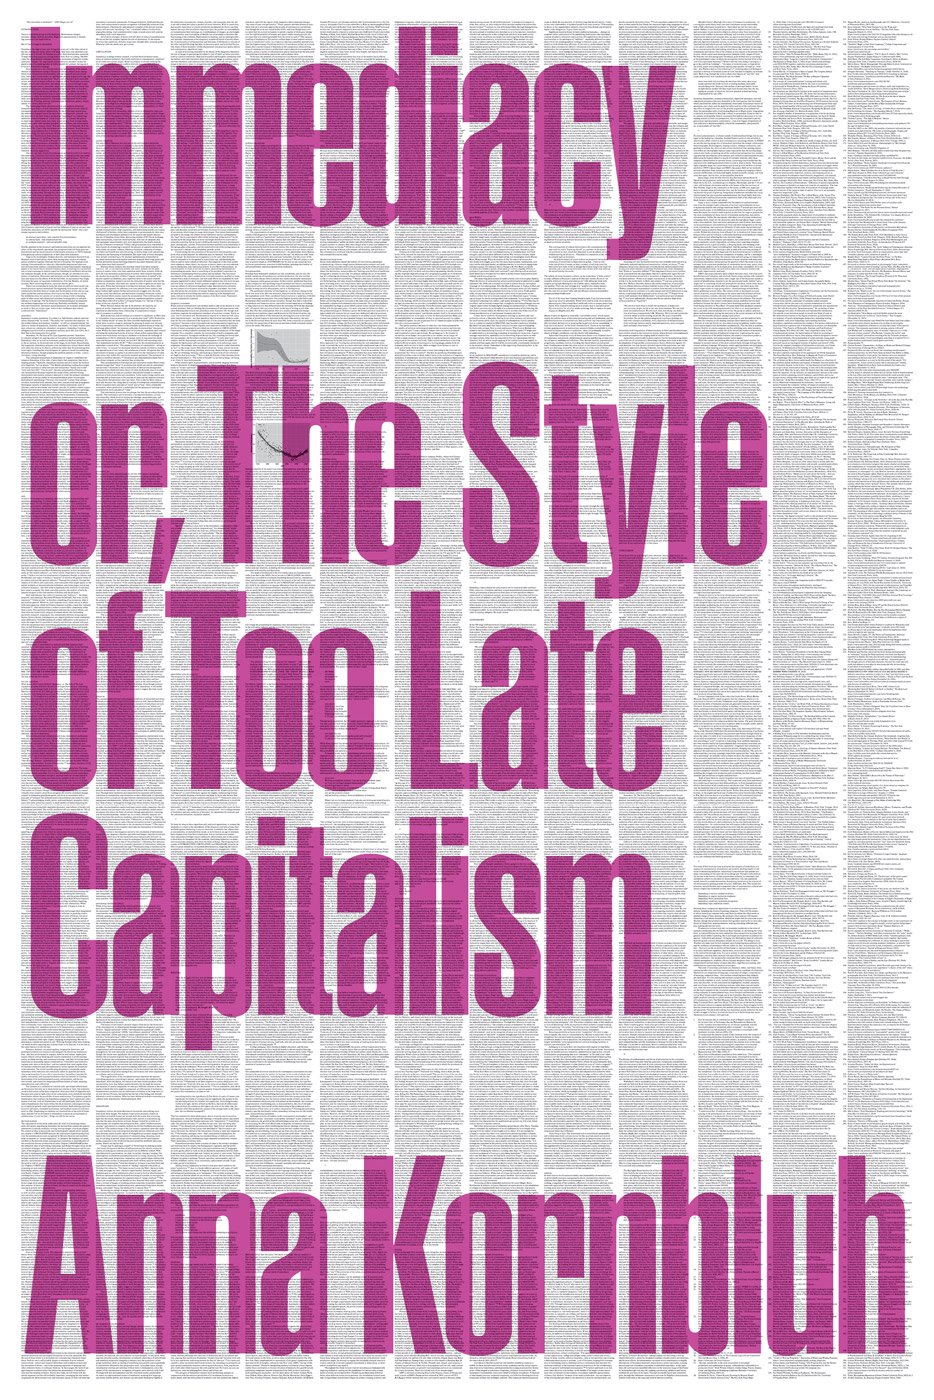 Book cover with magenta lettering over columns of very small black text